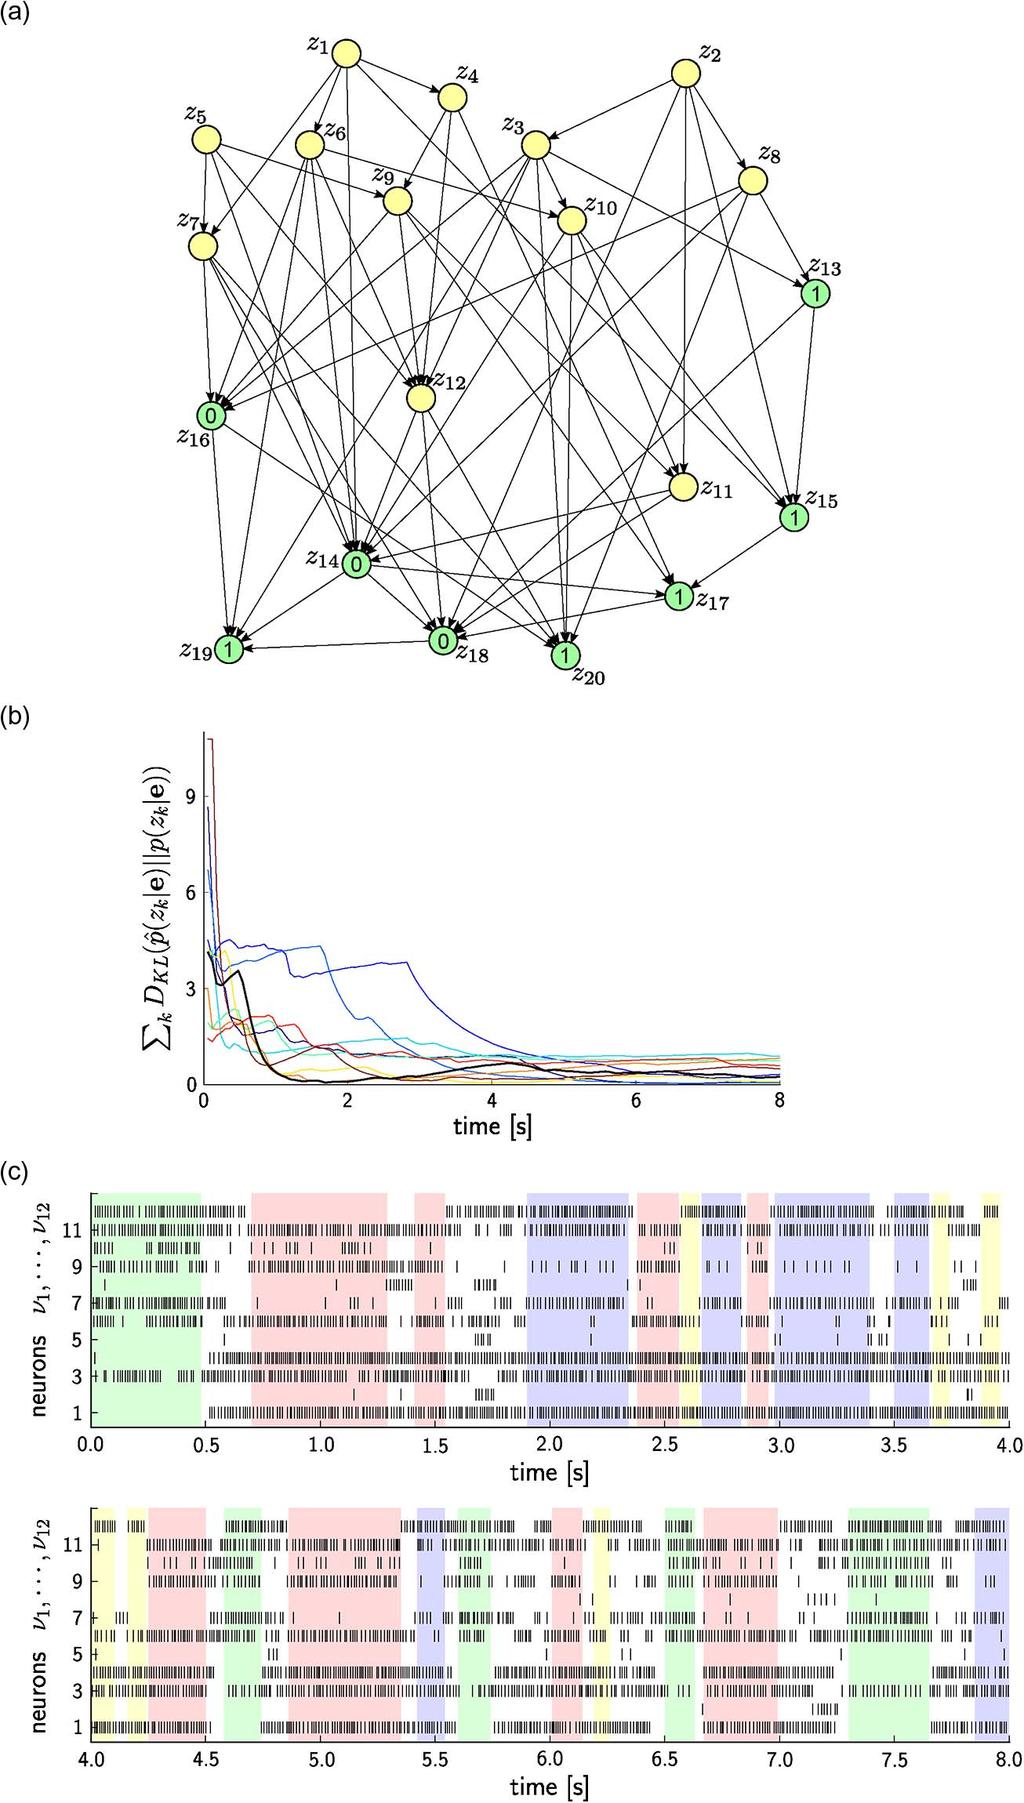 Fig. 4. Emulation of probabilistic inference through sampling in spiking networks for a fairly large and complex Bayesian network with numerous converging edges and undirected cycles.